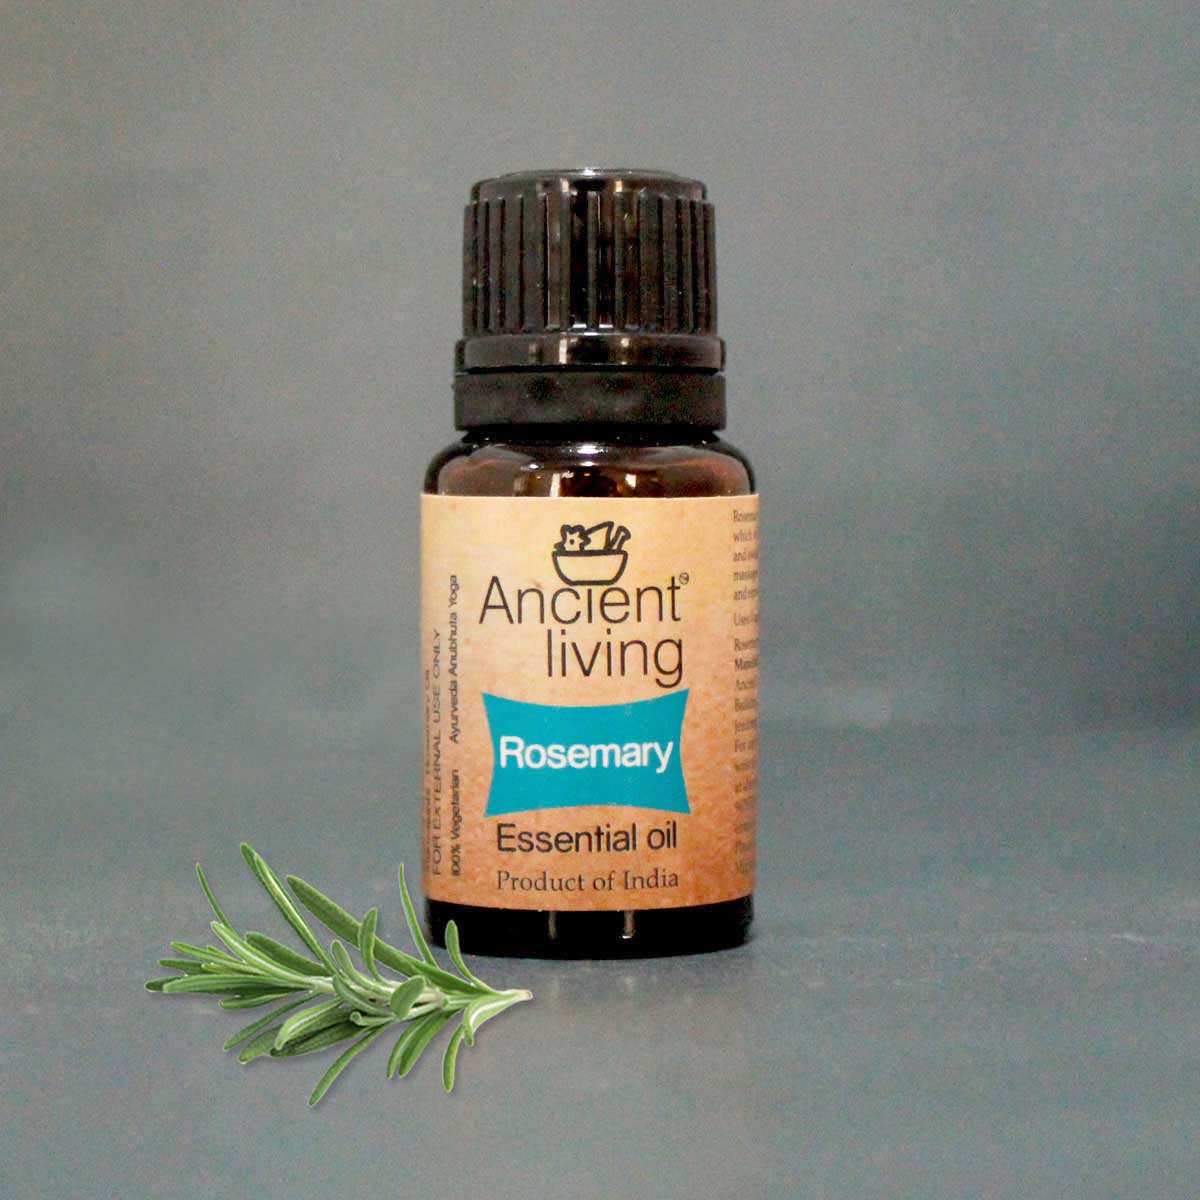 Rosemary Essential Oil - Ancient Living